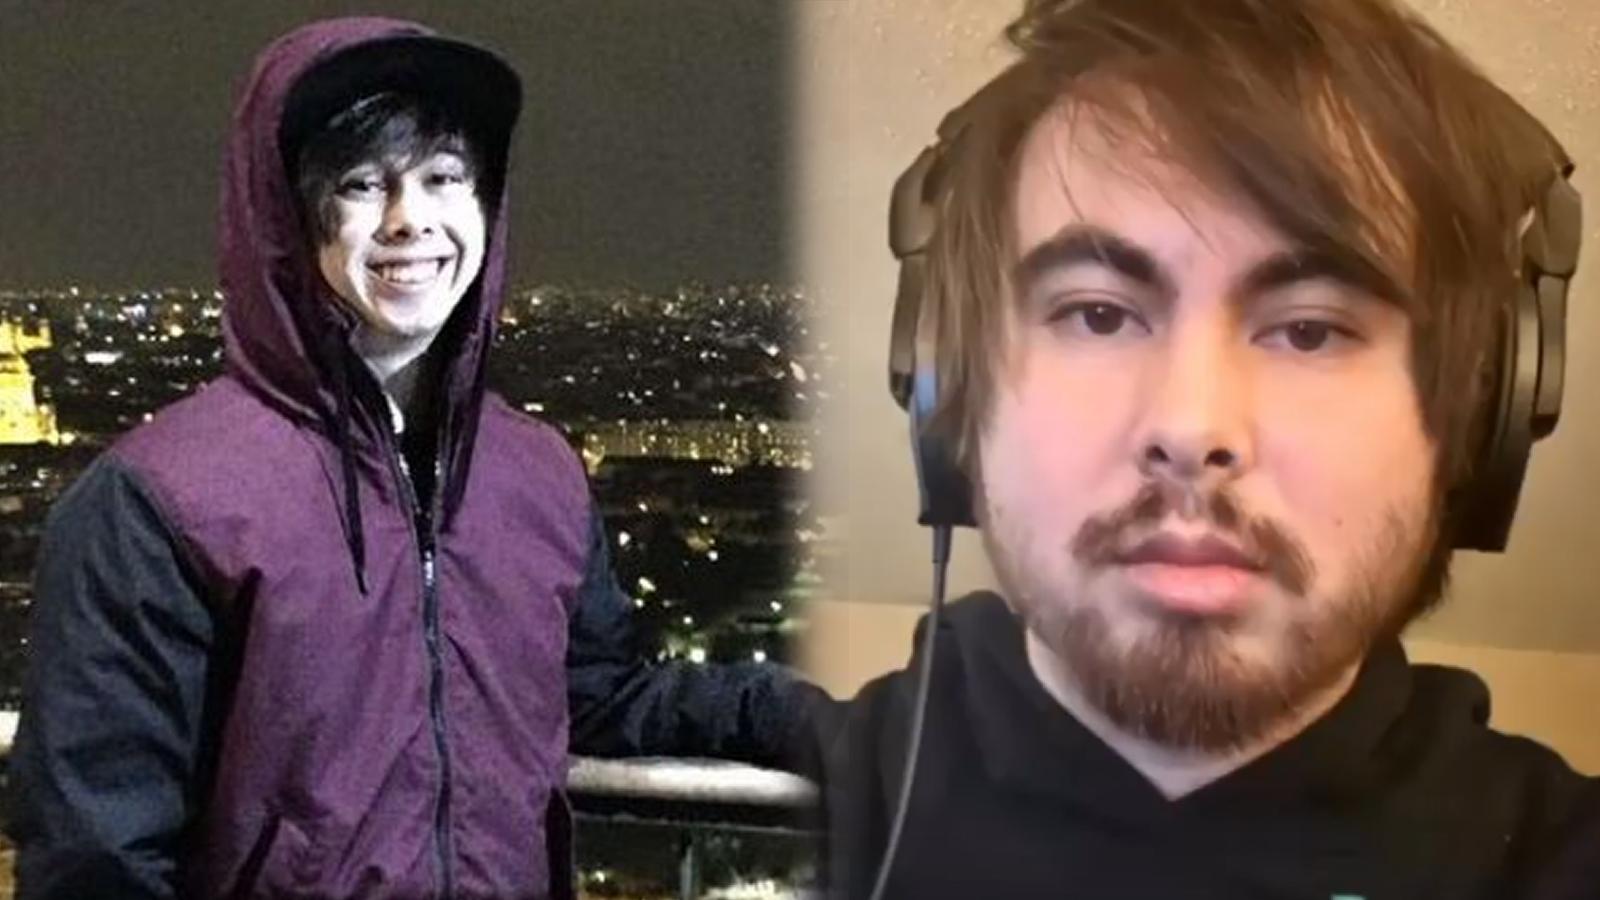 LeafyIsHere on the left, with a more recent selfie on the right.